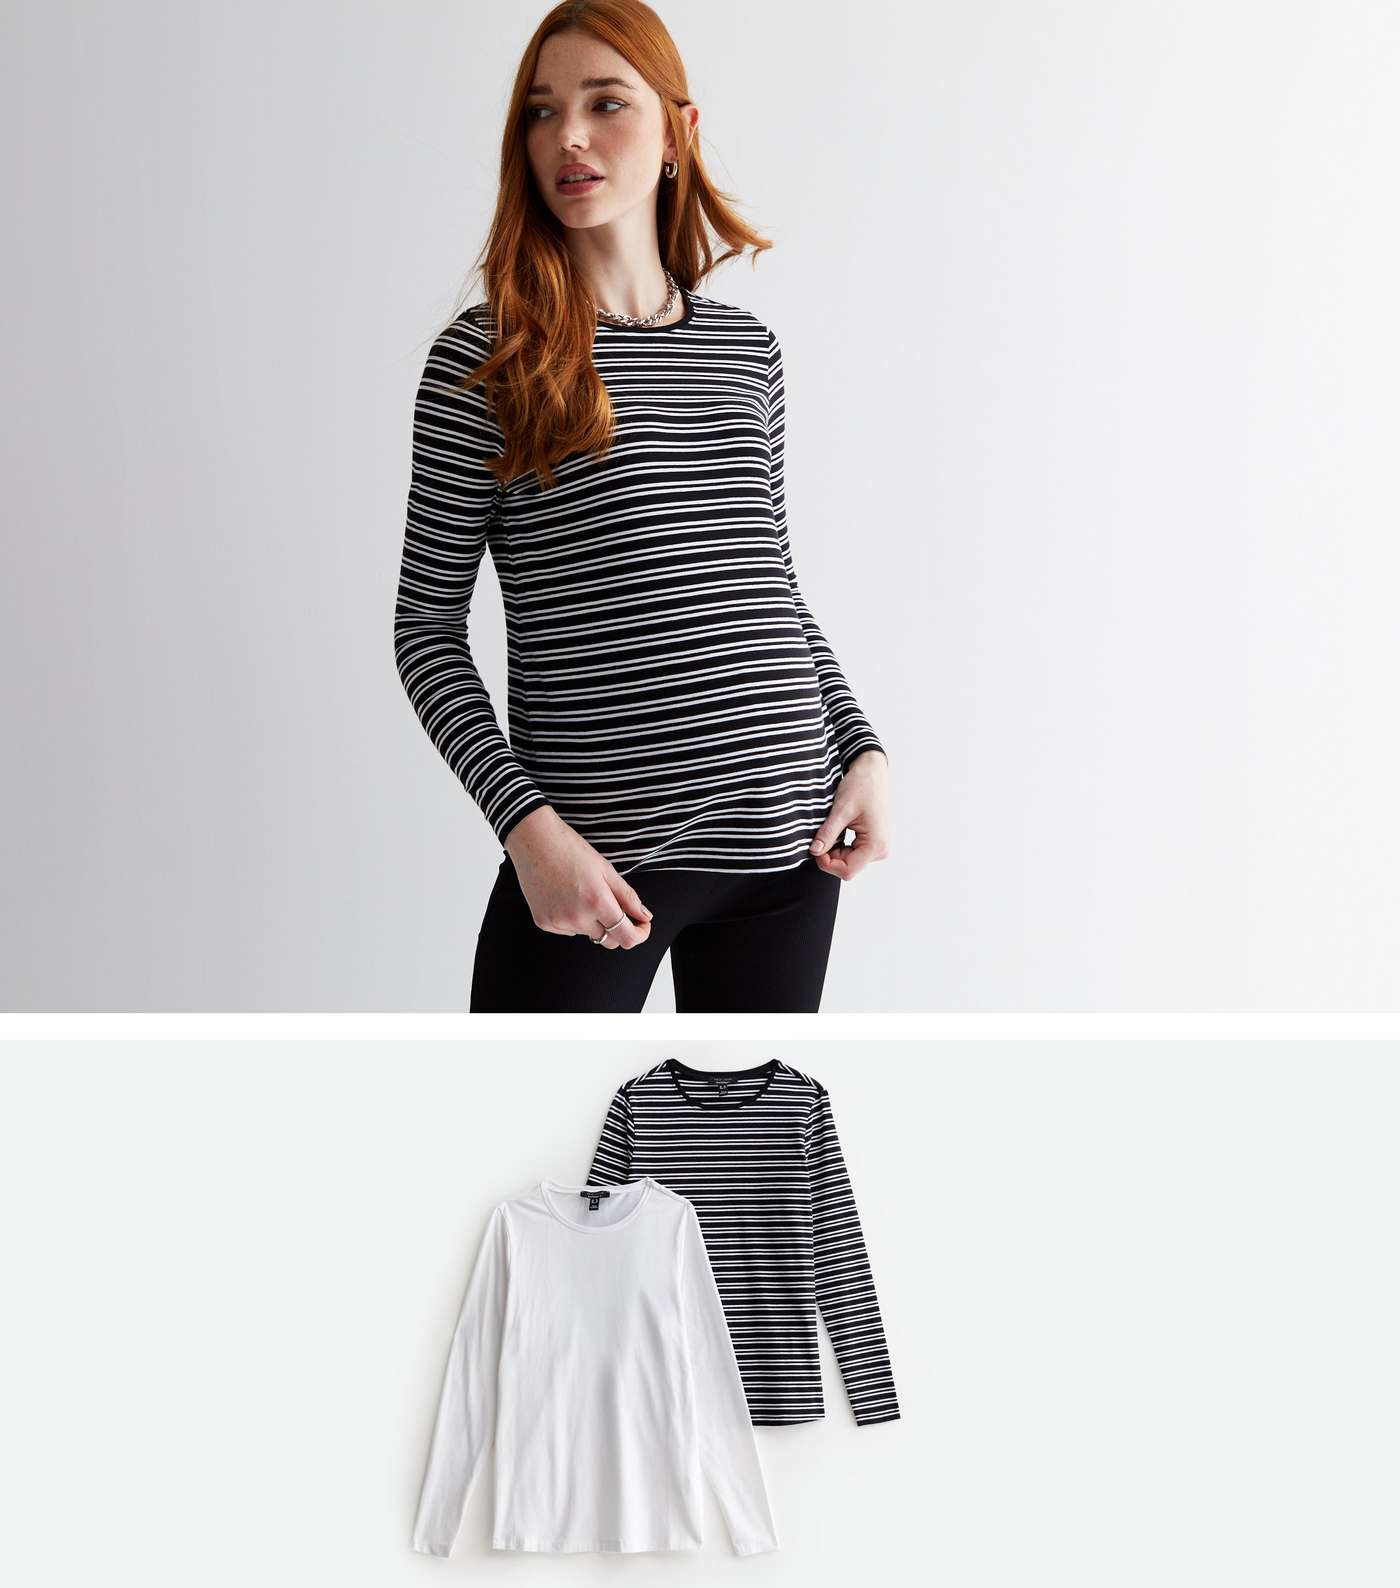 Maternity 2 Pack Black Stripe and White Crew Neck Long Sleeve T-Shirts